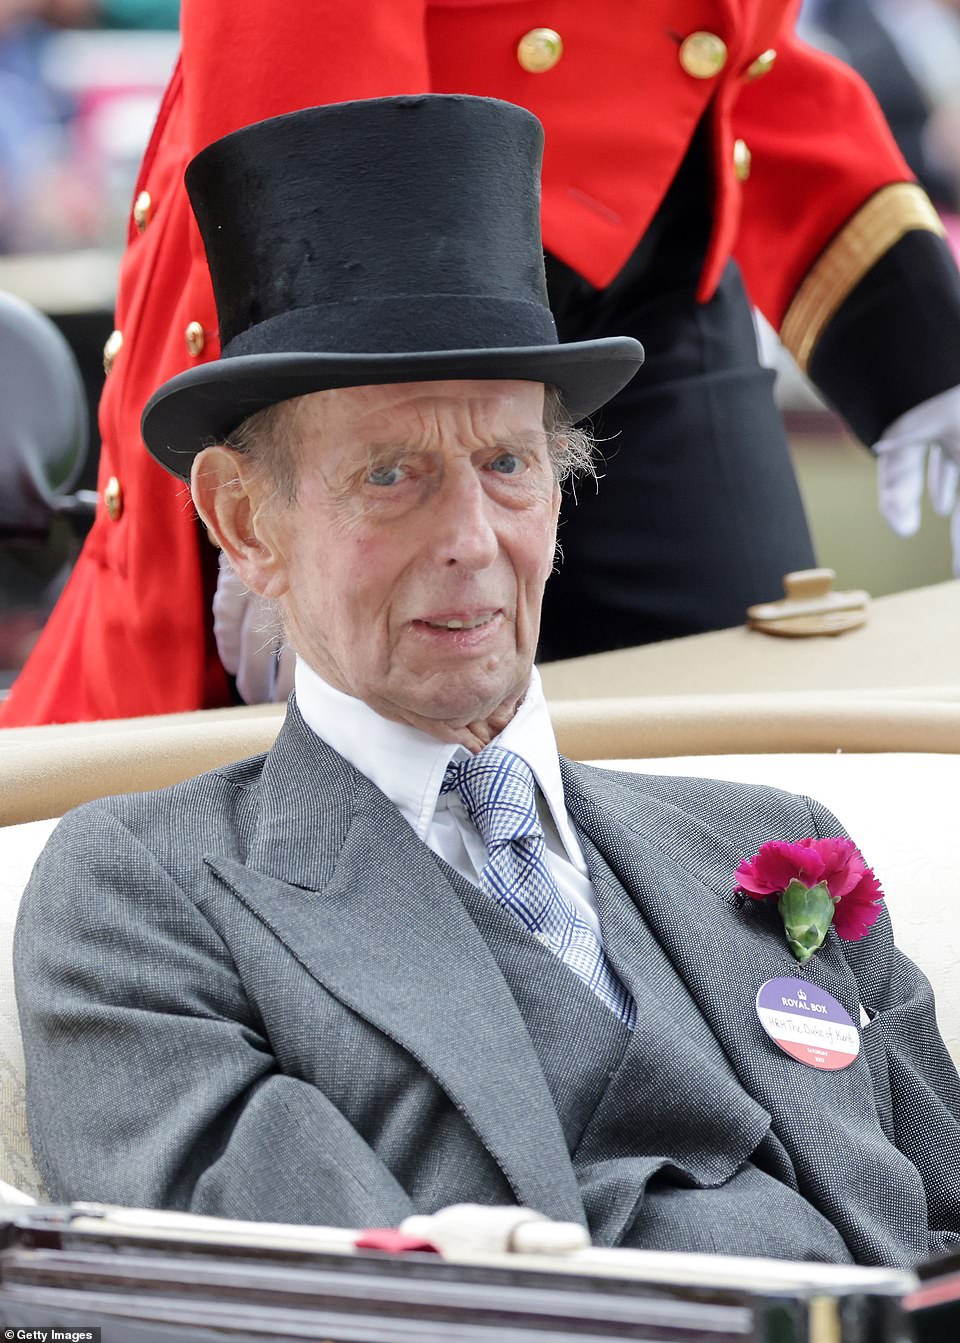 The Duke of Kent (pictured) was another king who took part in the carriage procession today, although he did not ride in the same carriage as Beatrice and Edoardo